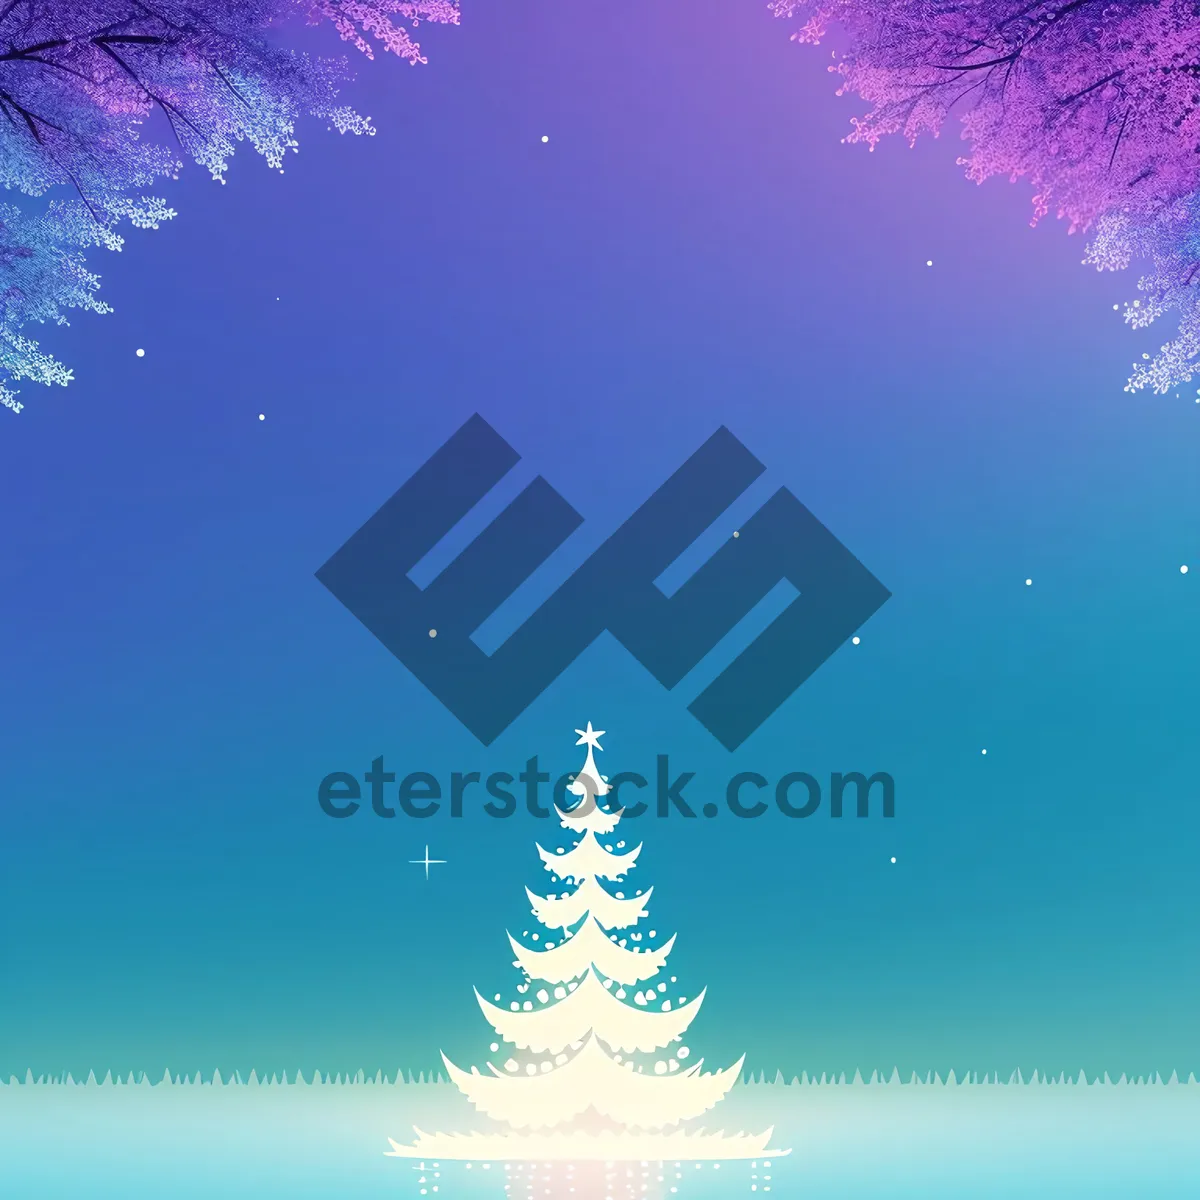 Picture of Festive Winter Wonderland with Snowflakes and Tree